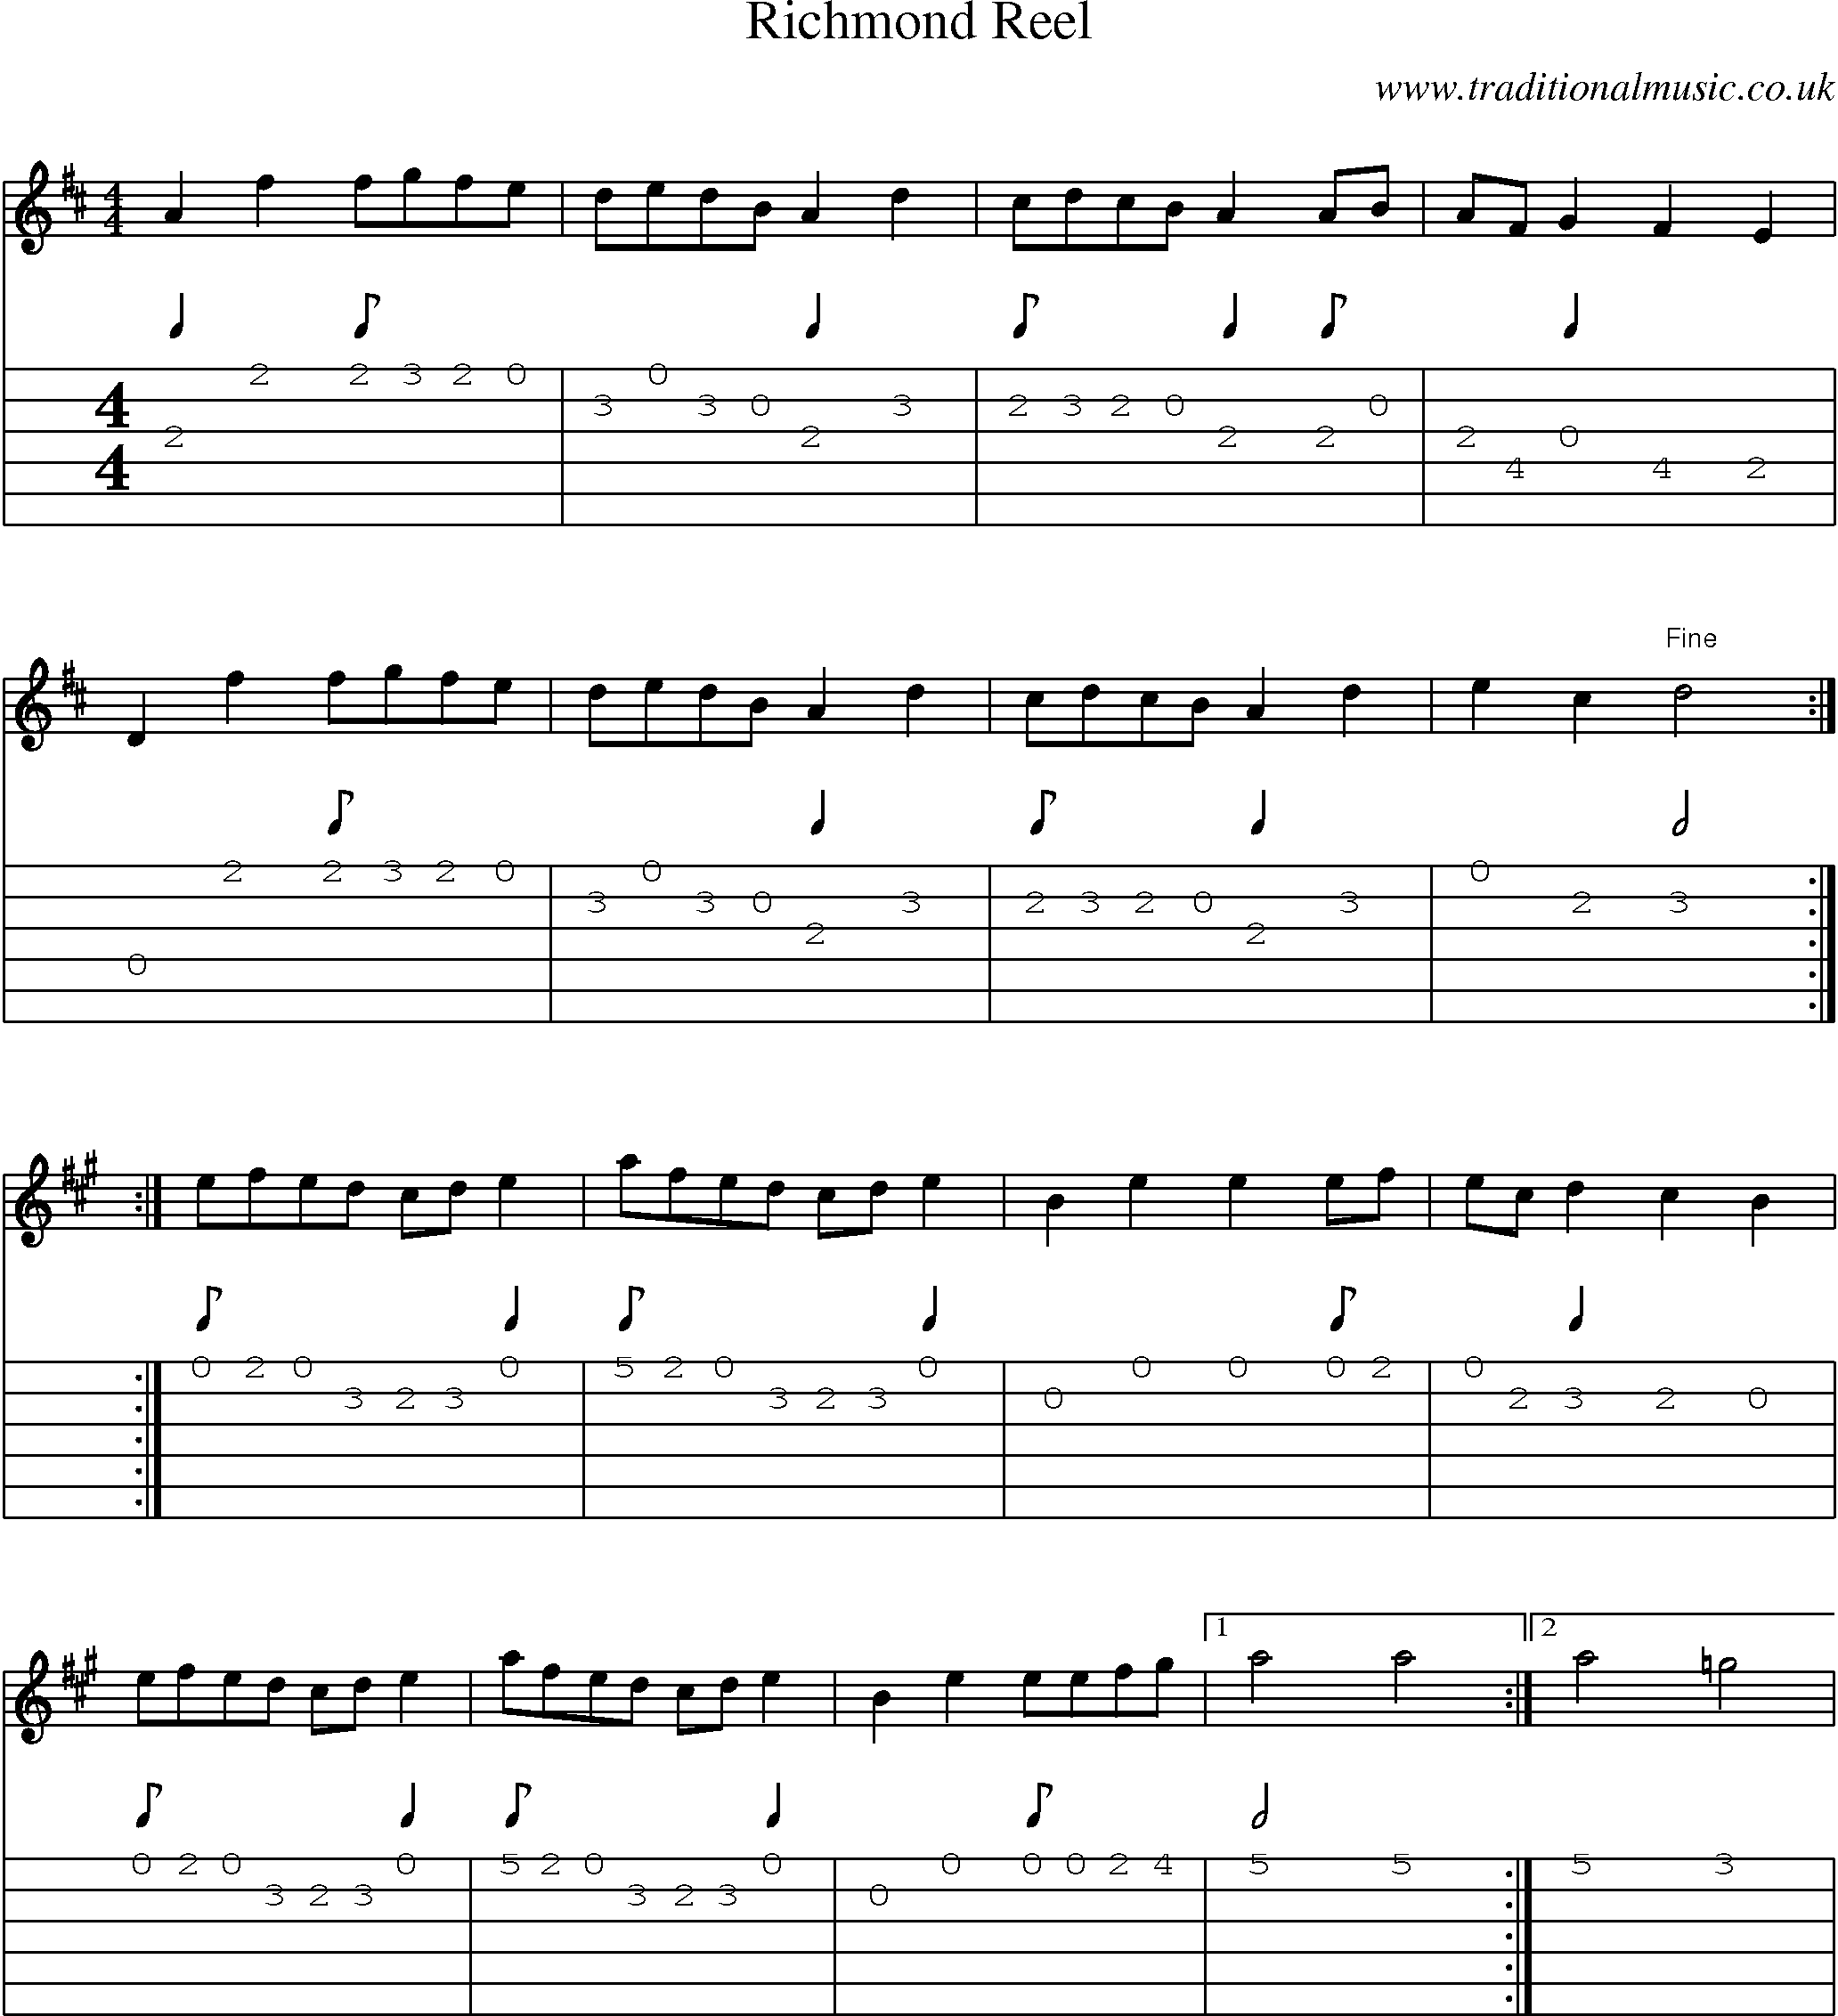 Music Score and Guitar Tabs for Richmond Reel